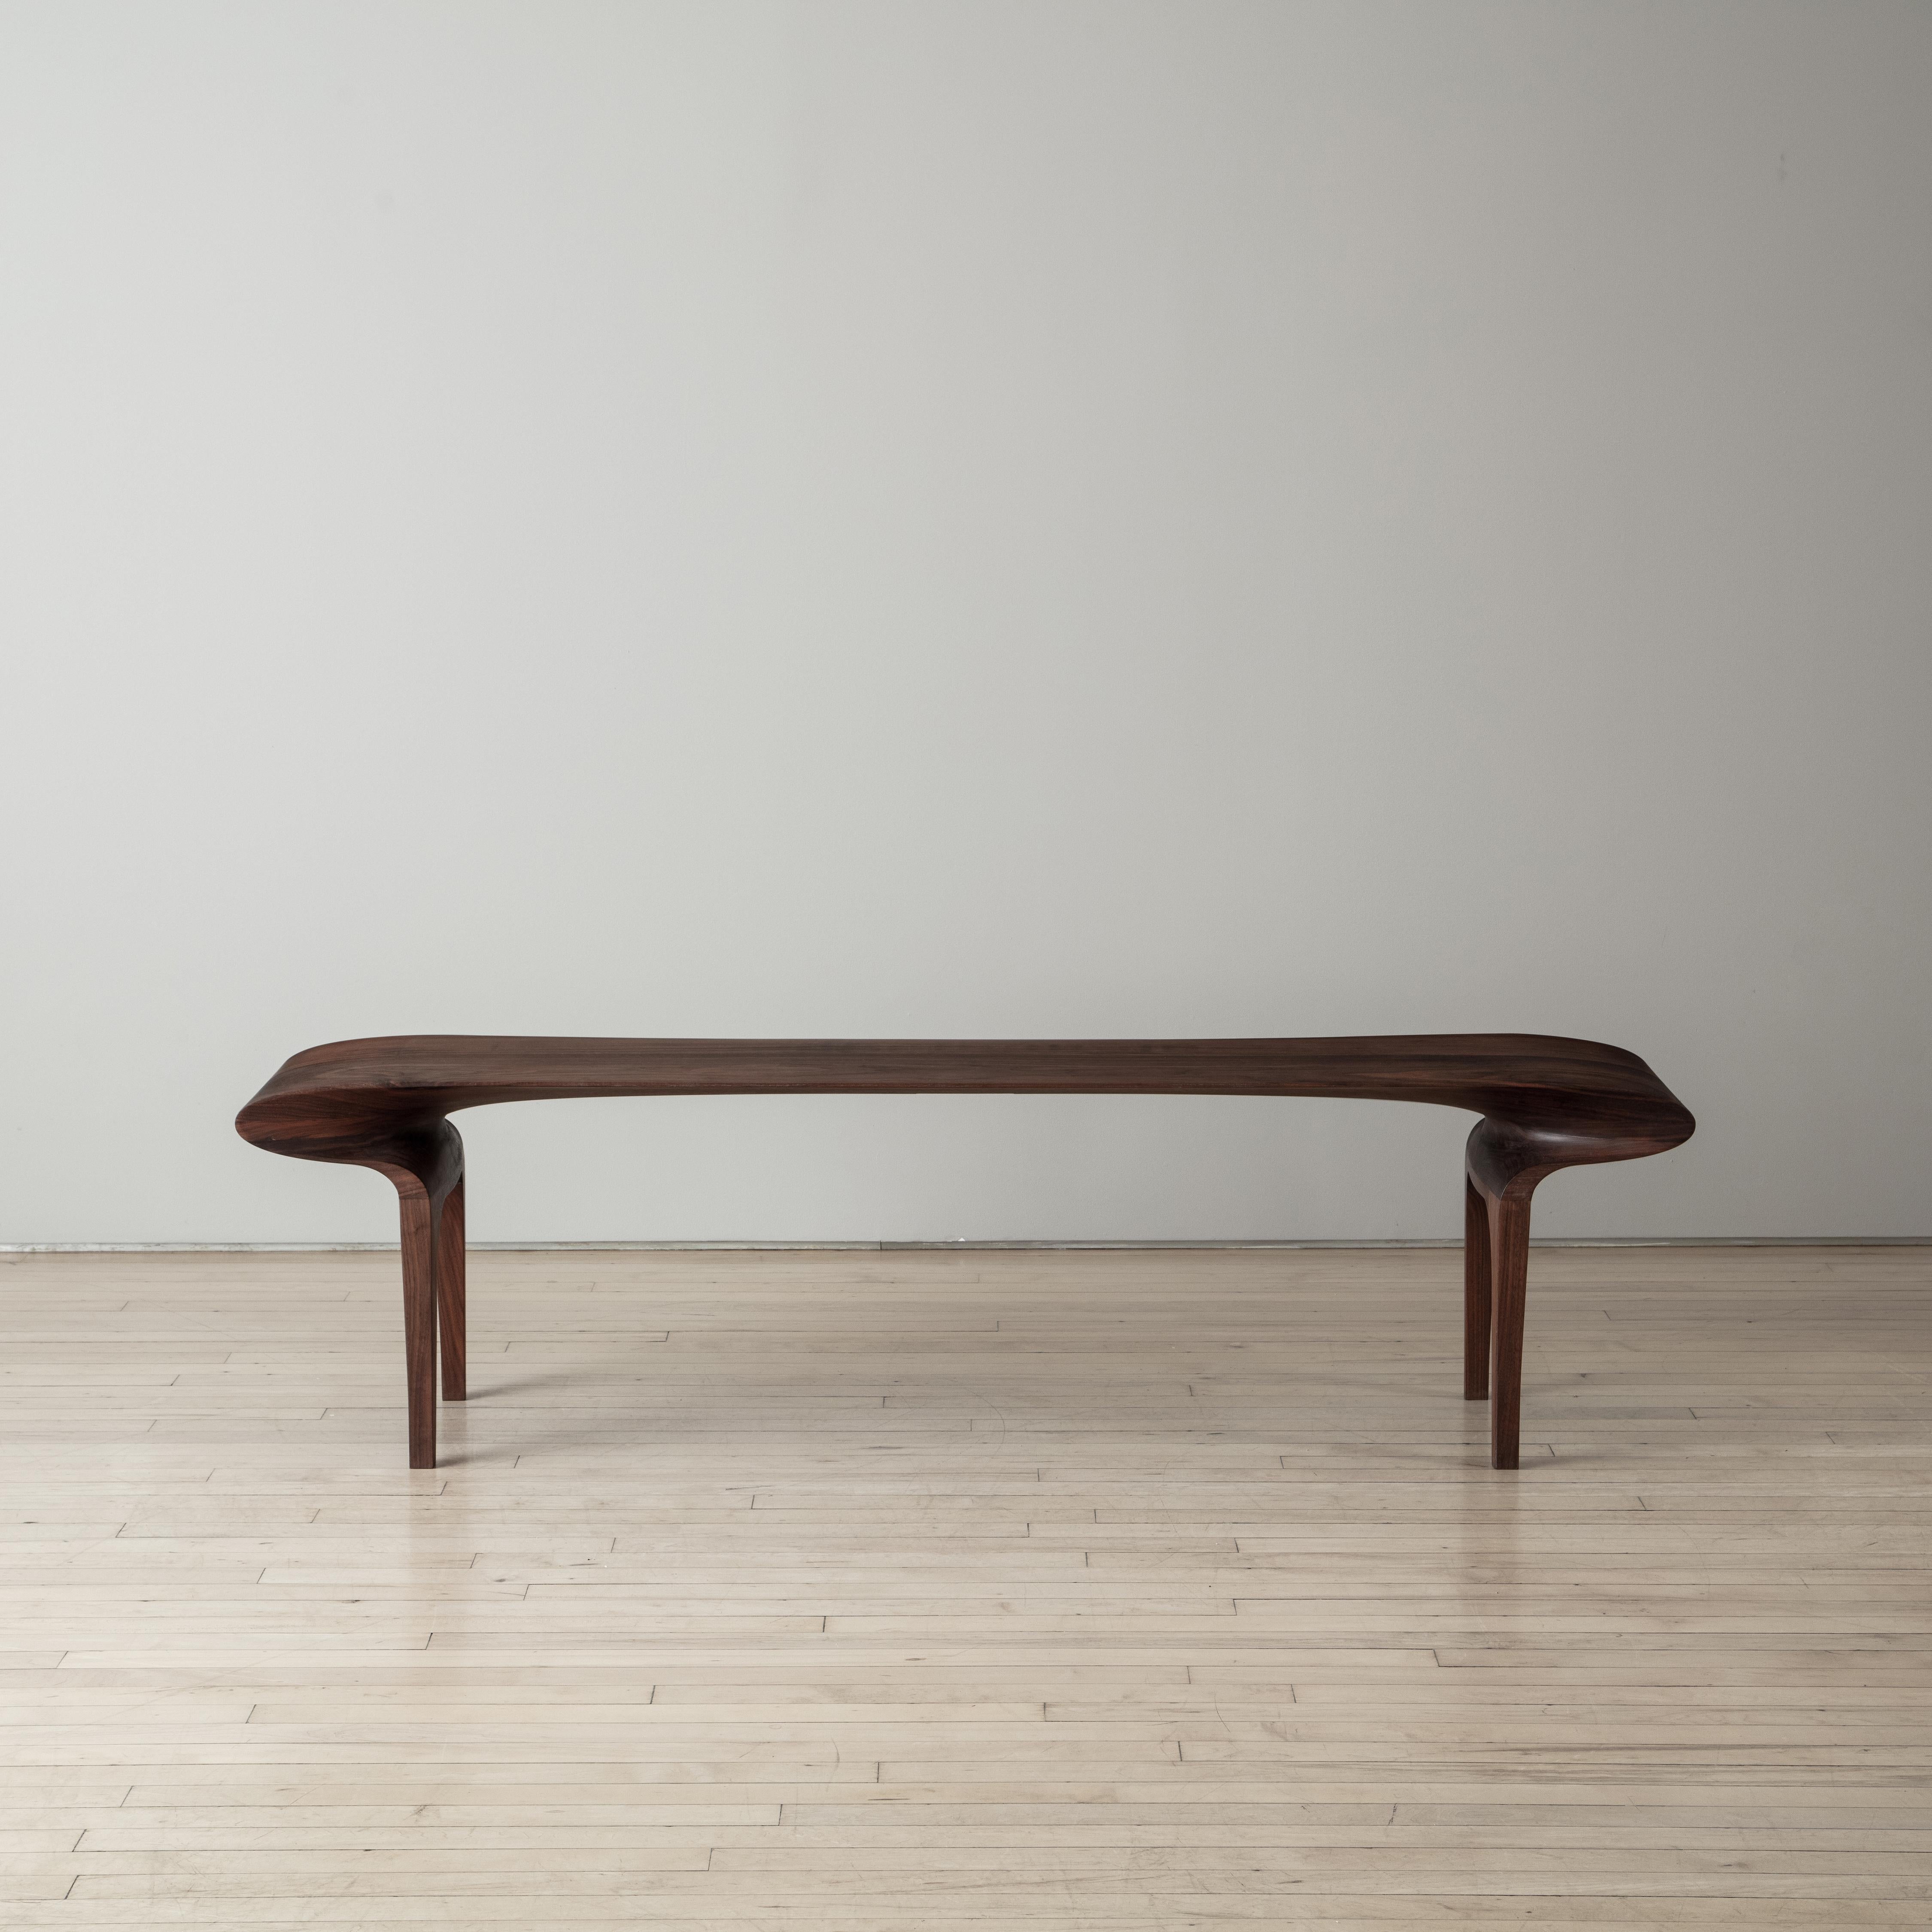 Inspired by the clean, organic silhouettes and elegant simplicity of the 20th Century Art Nouveau, Sperlein first introduced the Contour Collection in 2009. The fluid curves of the wood piece result from the time-honored woodcraft techniques and